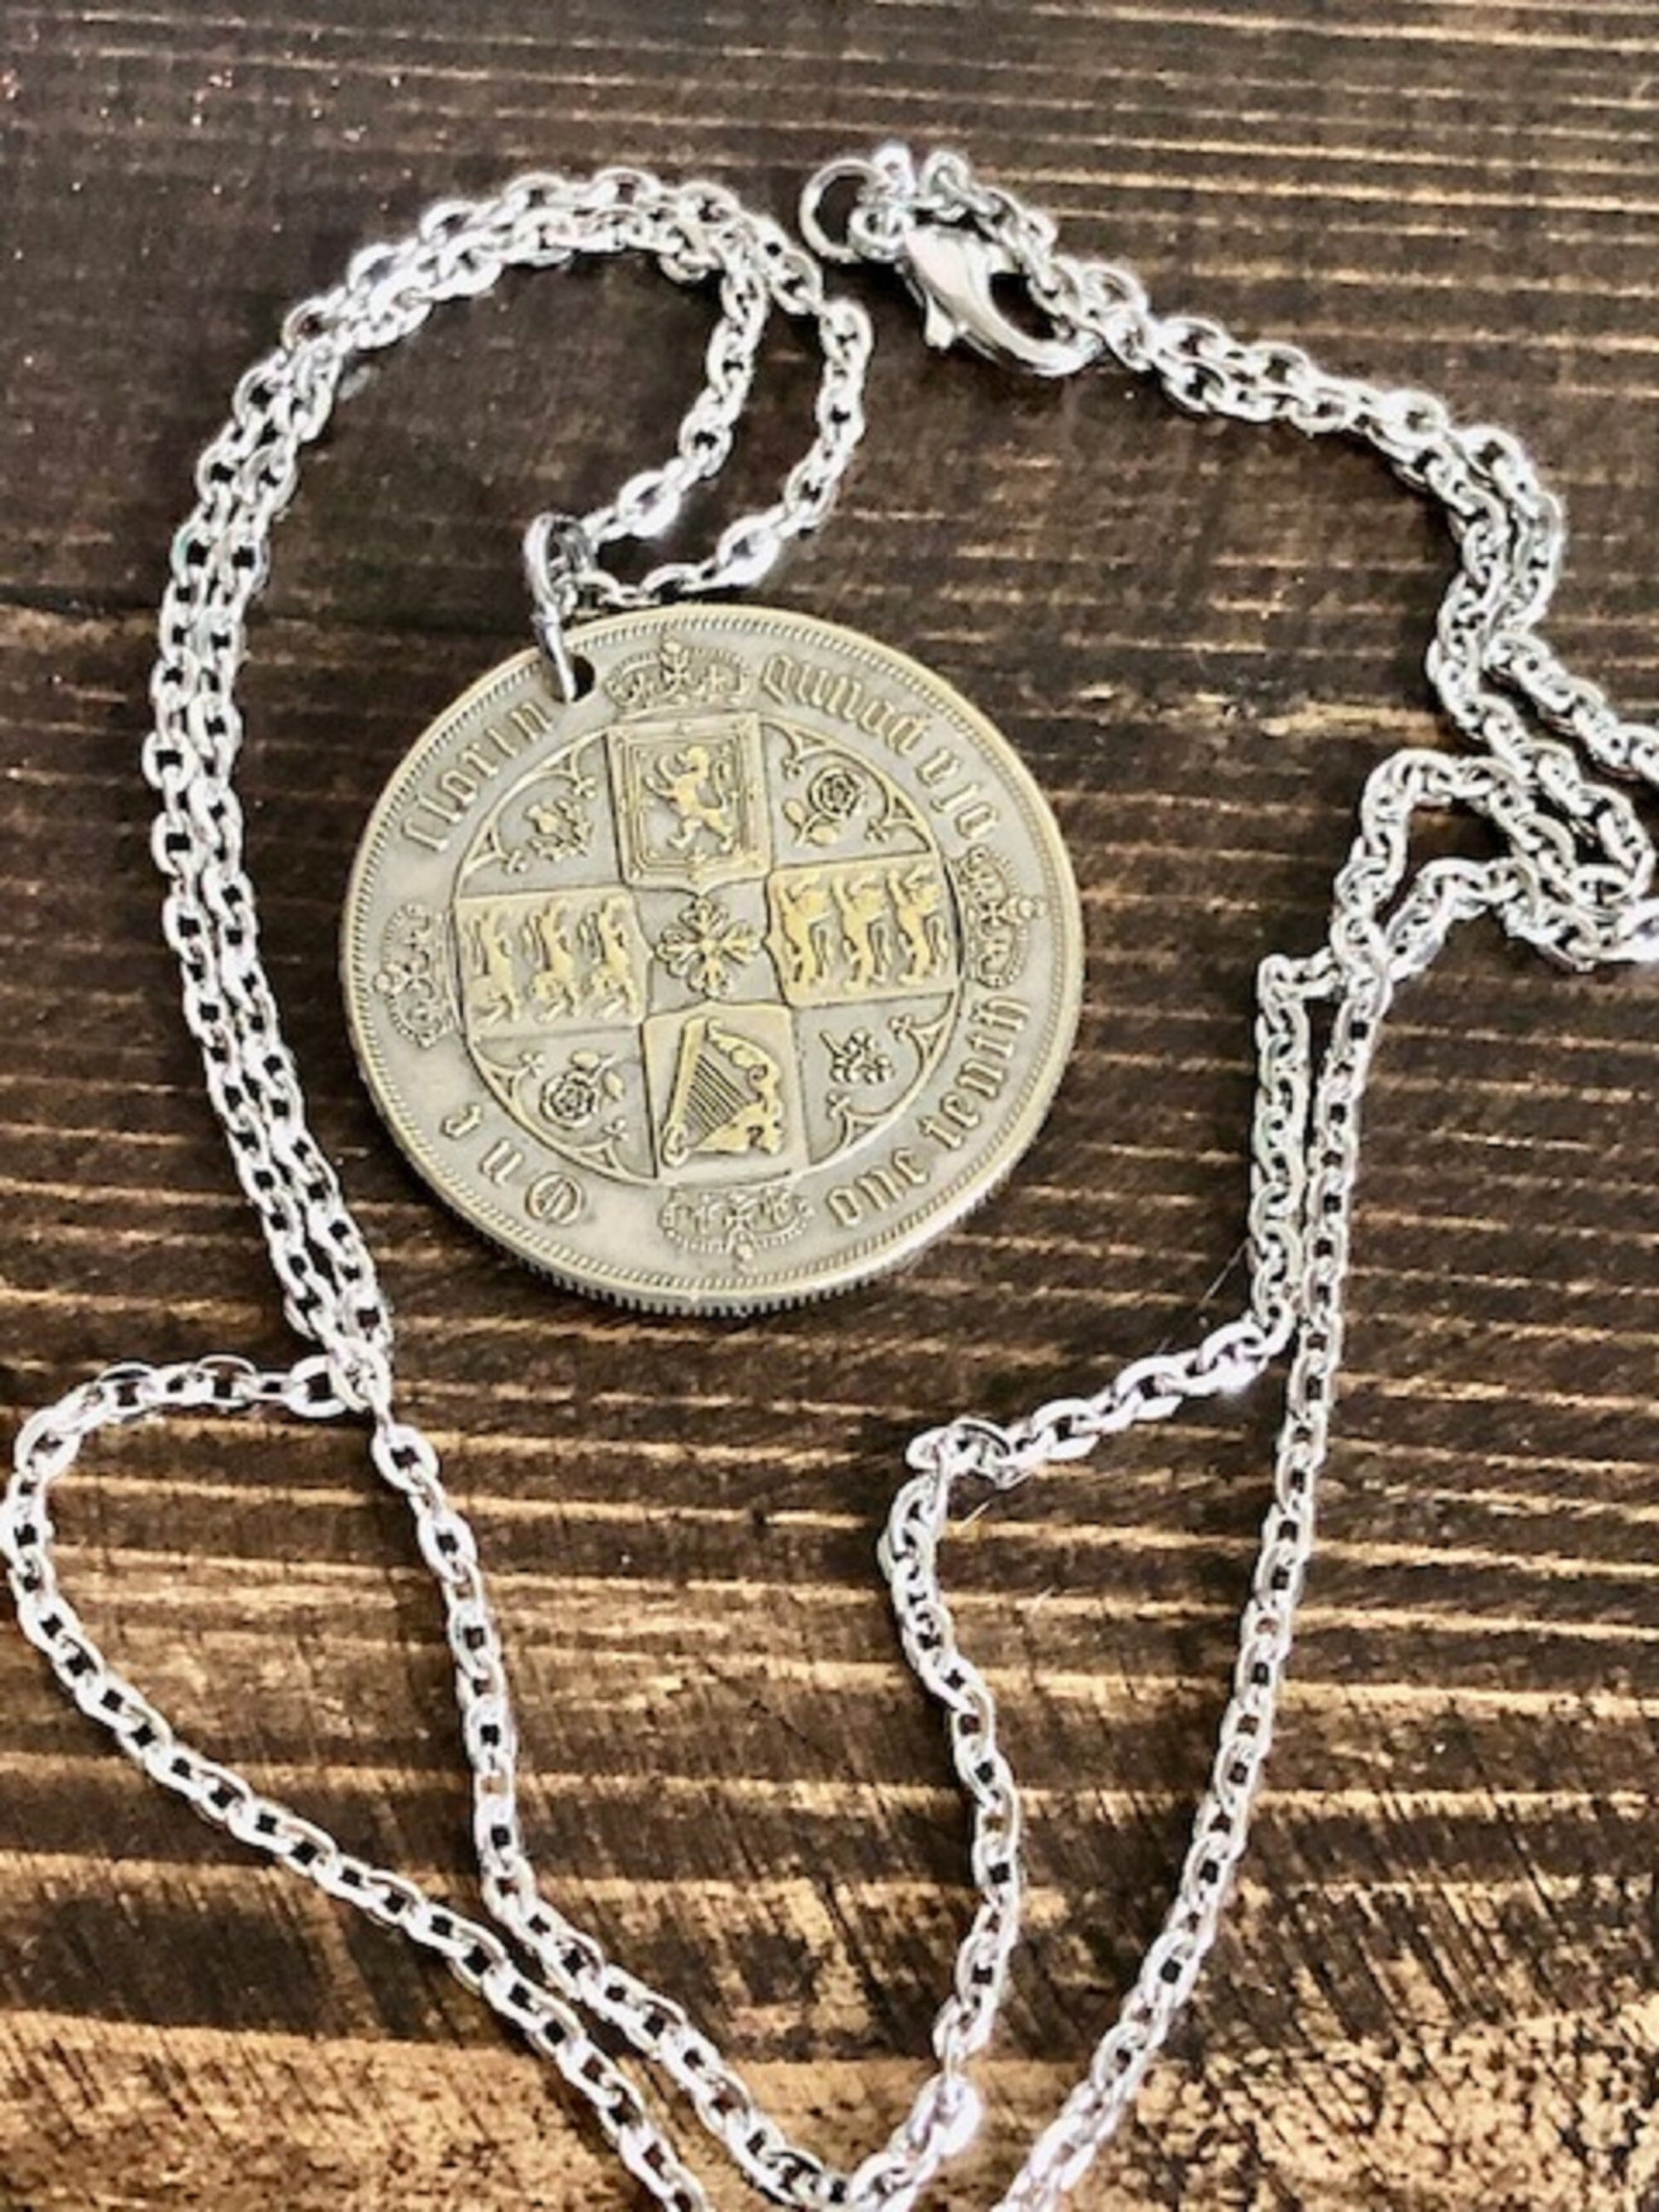 Replica British Coin Necklace - Pendant United Kingdom British Replica COPY Pendant Custom Made For Entertainment Only - Coin Enthusiast